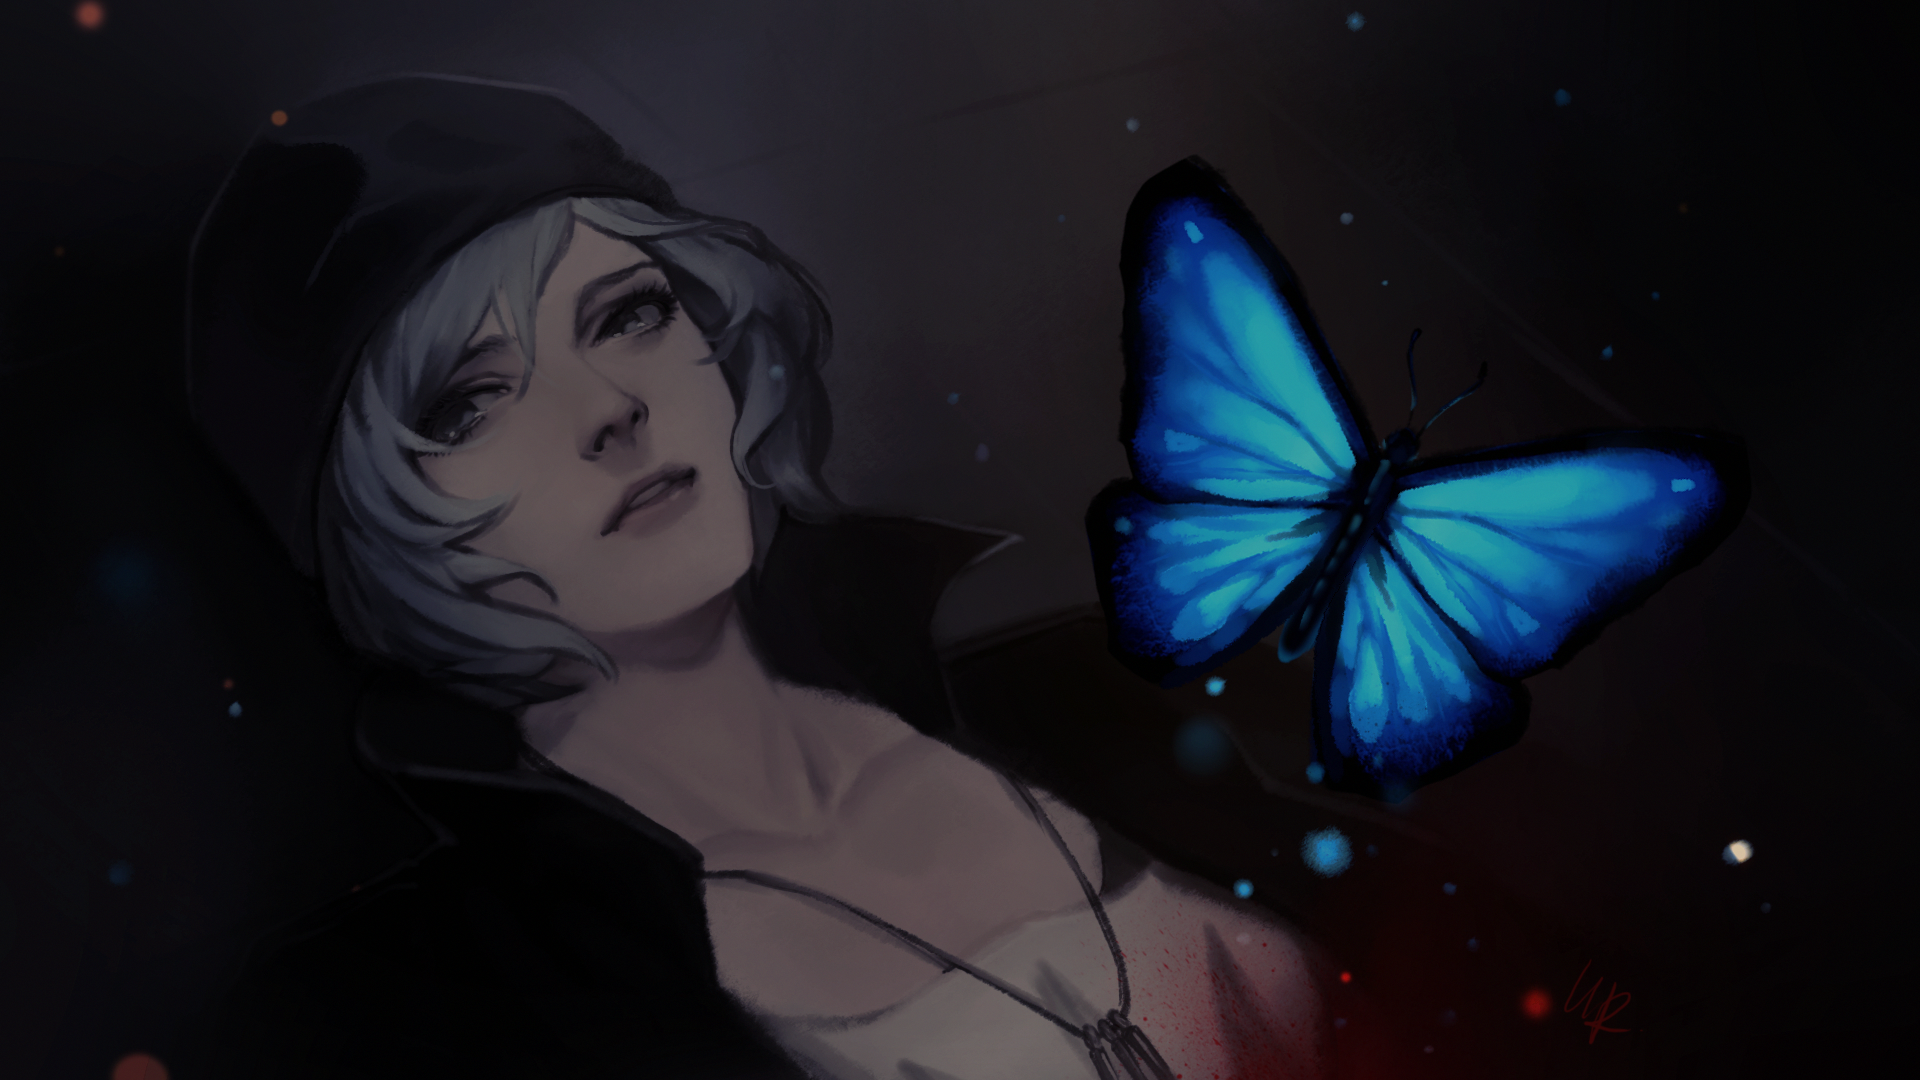 Download 1920x1080 Life Is Strange, Chloe Price, Blue Butterfly, Artwork Wallpaper for Widescreen